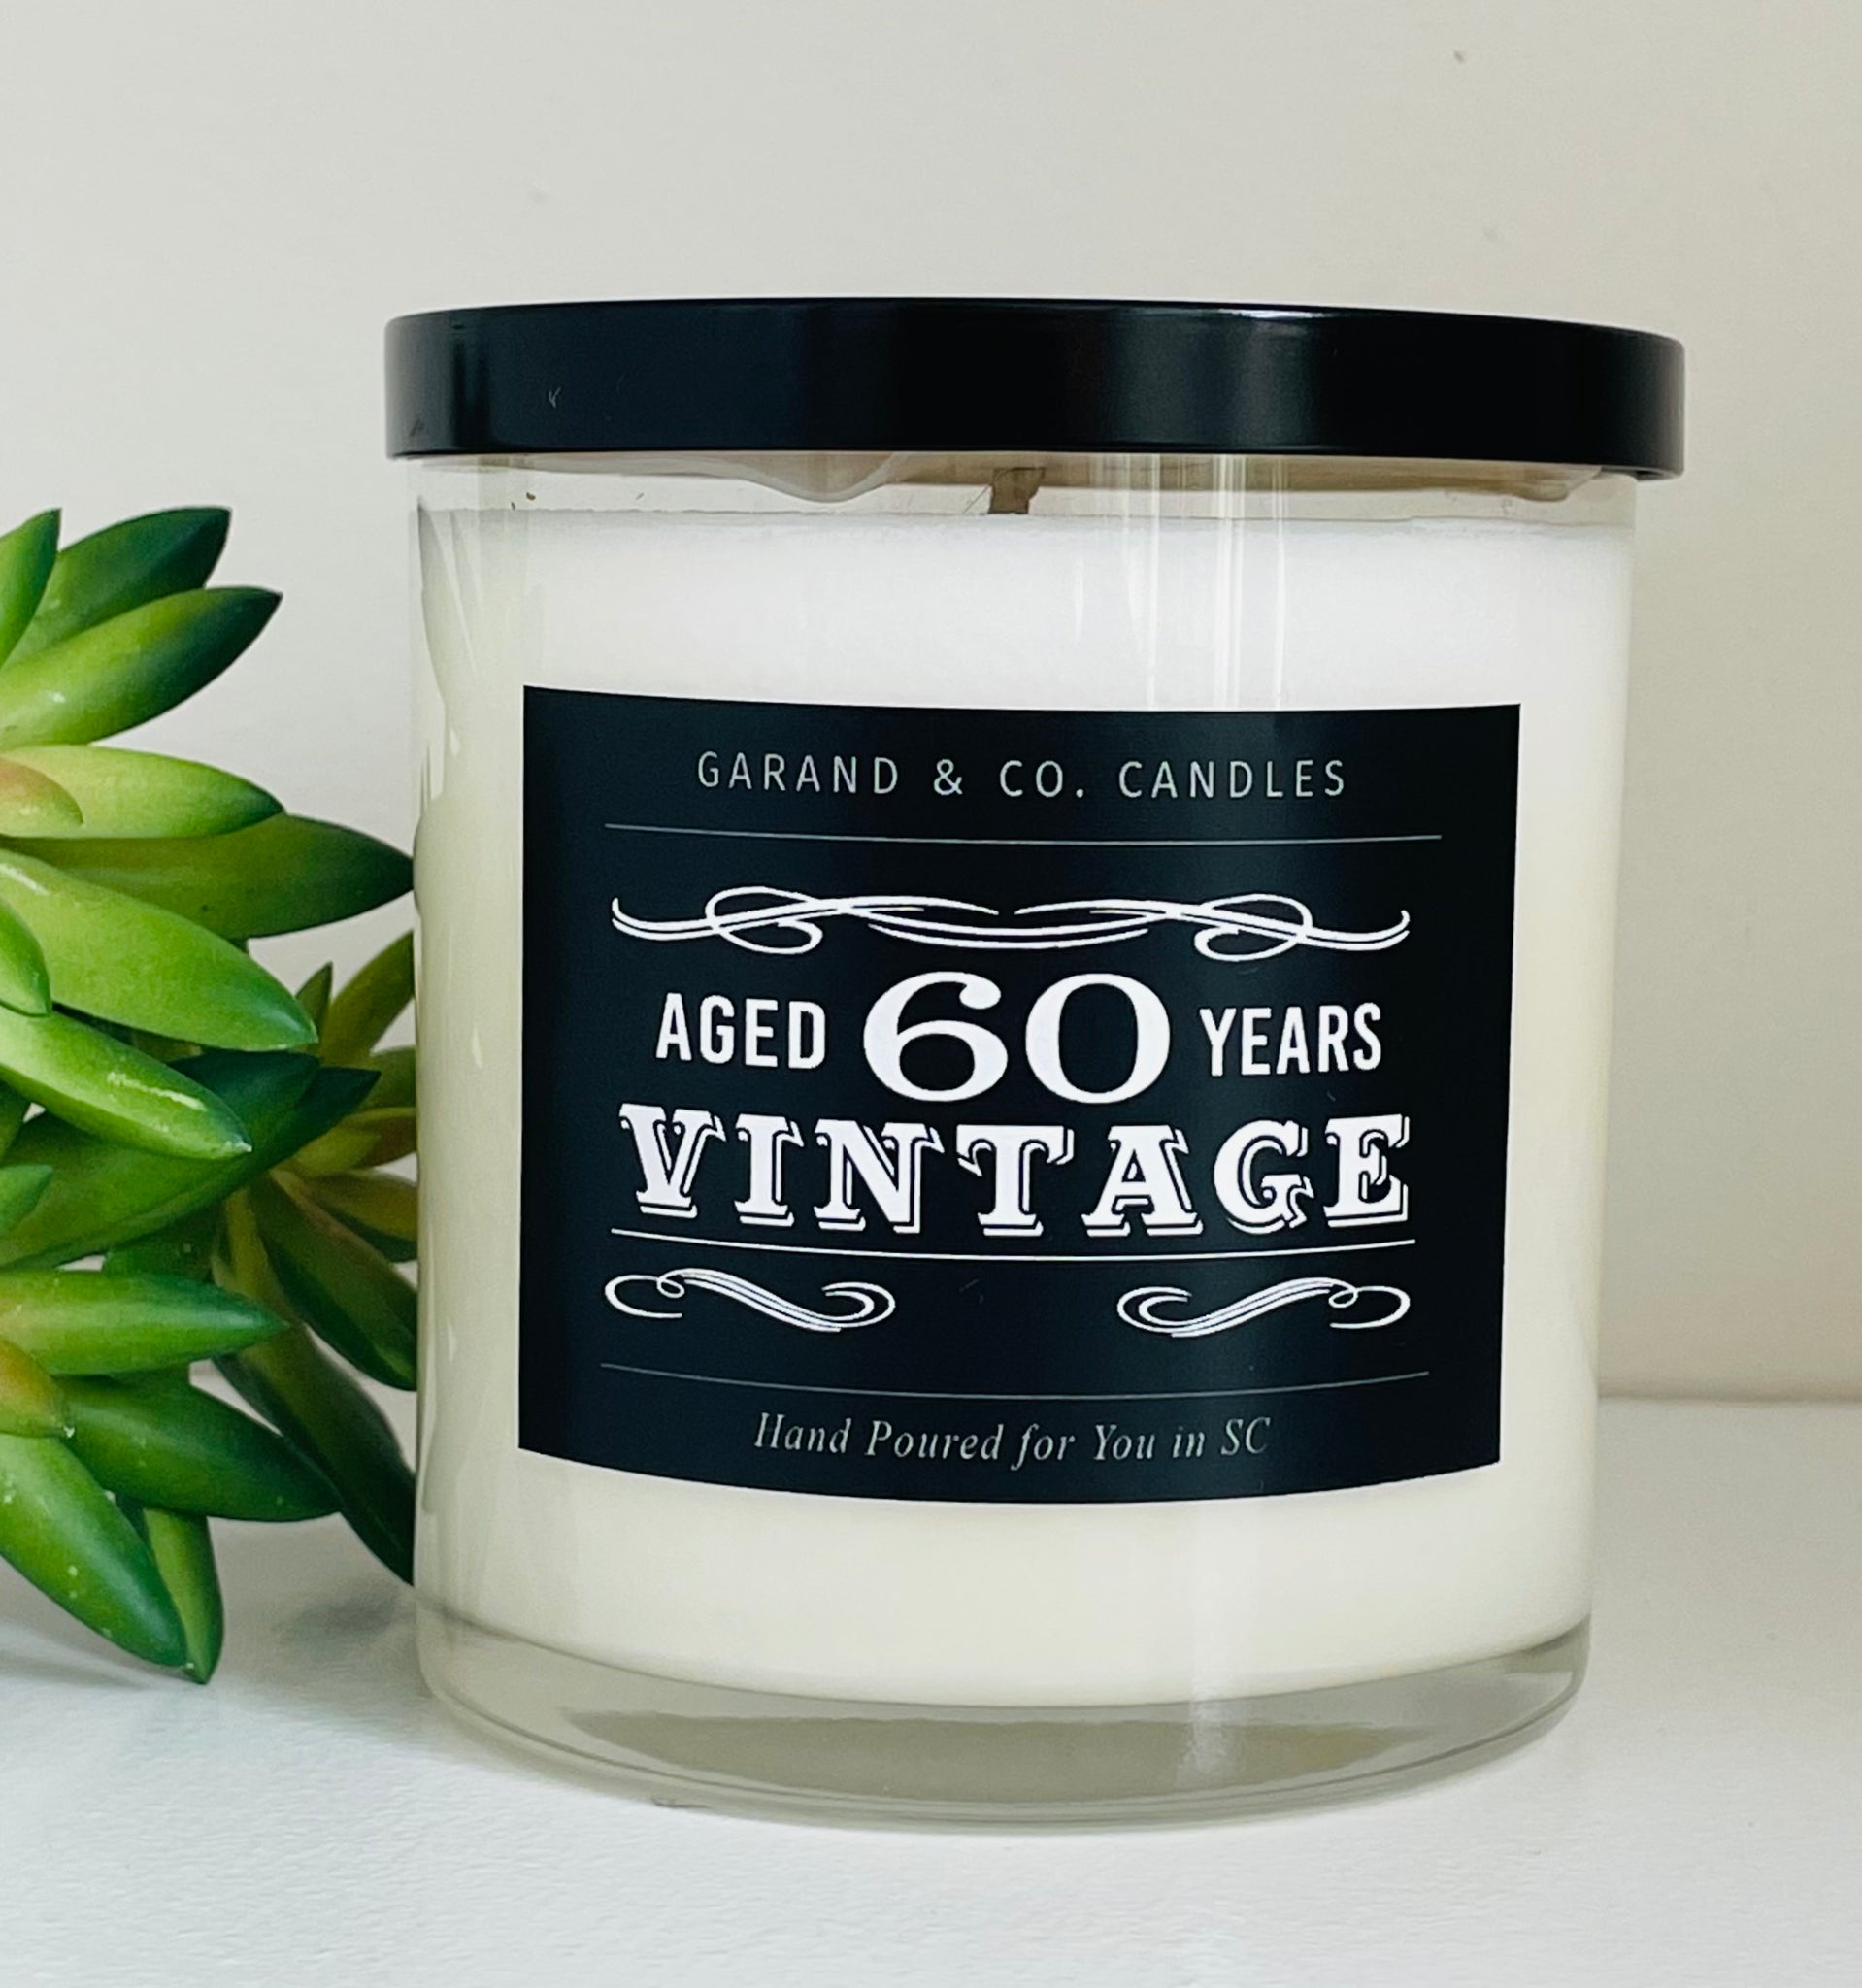 12 oz Clear Glass Jar Candle - "Vintage" 60th Birthday Candle